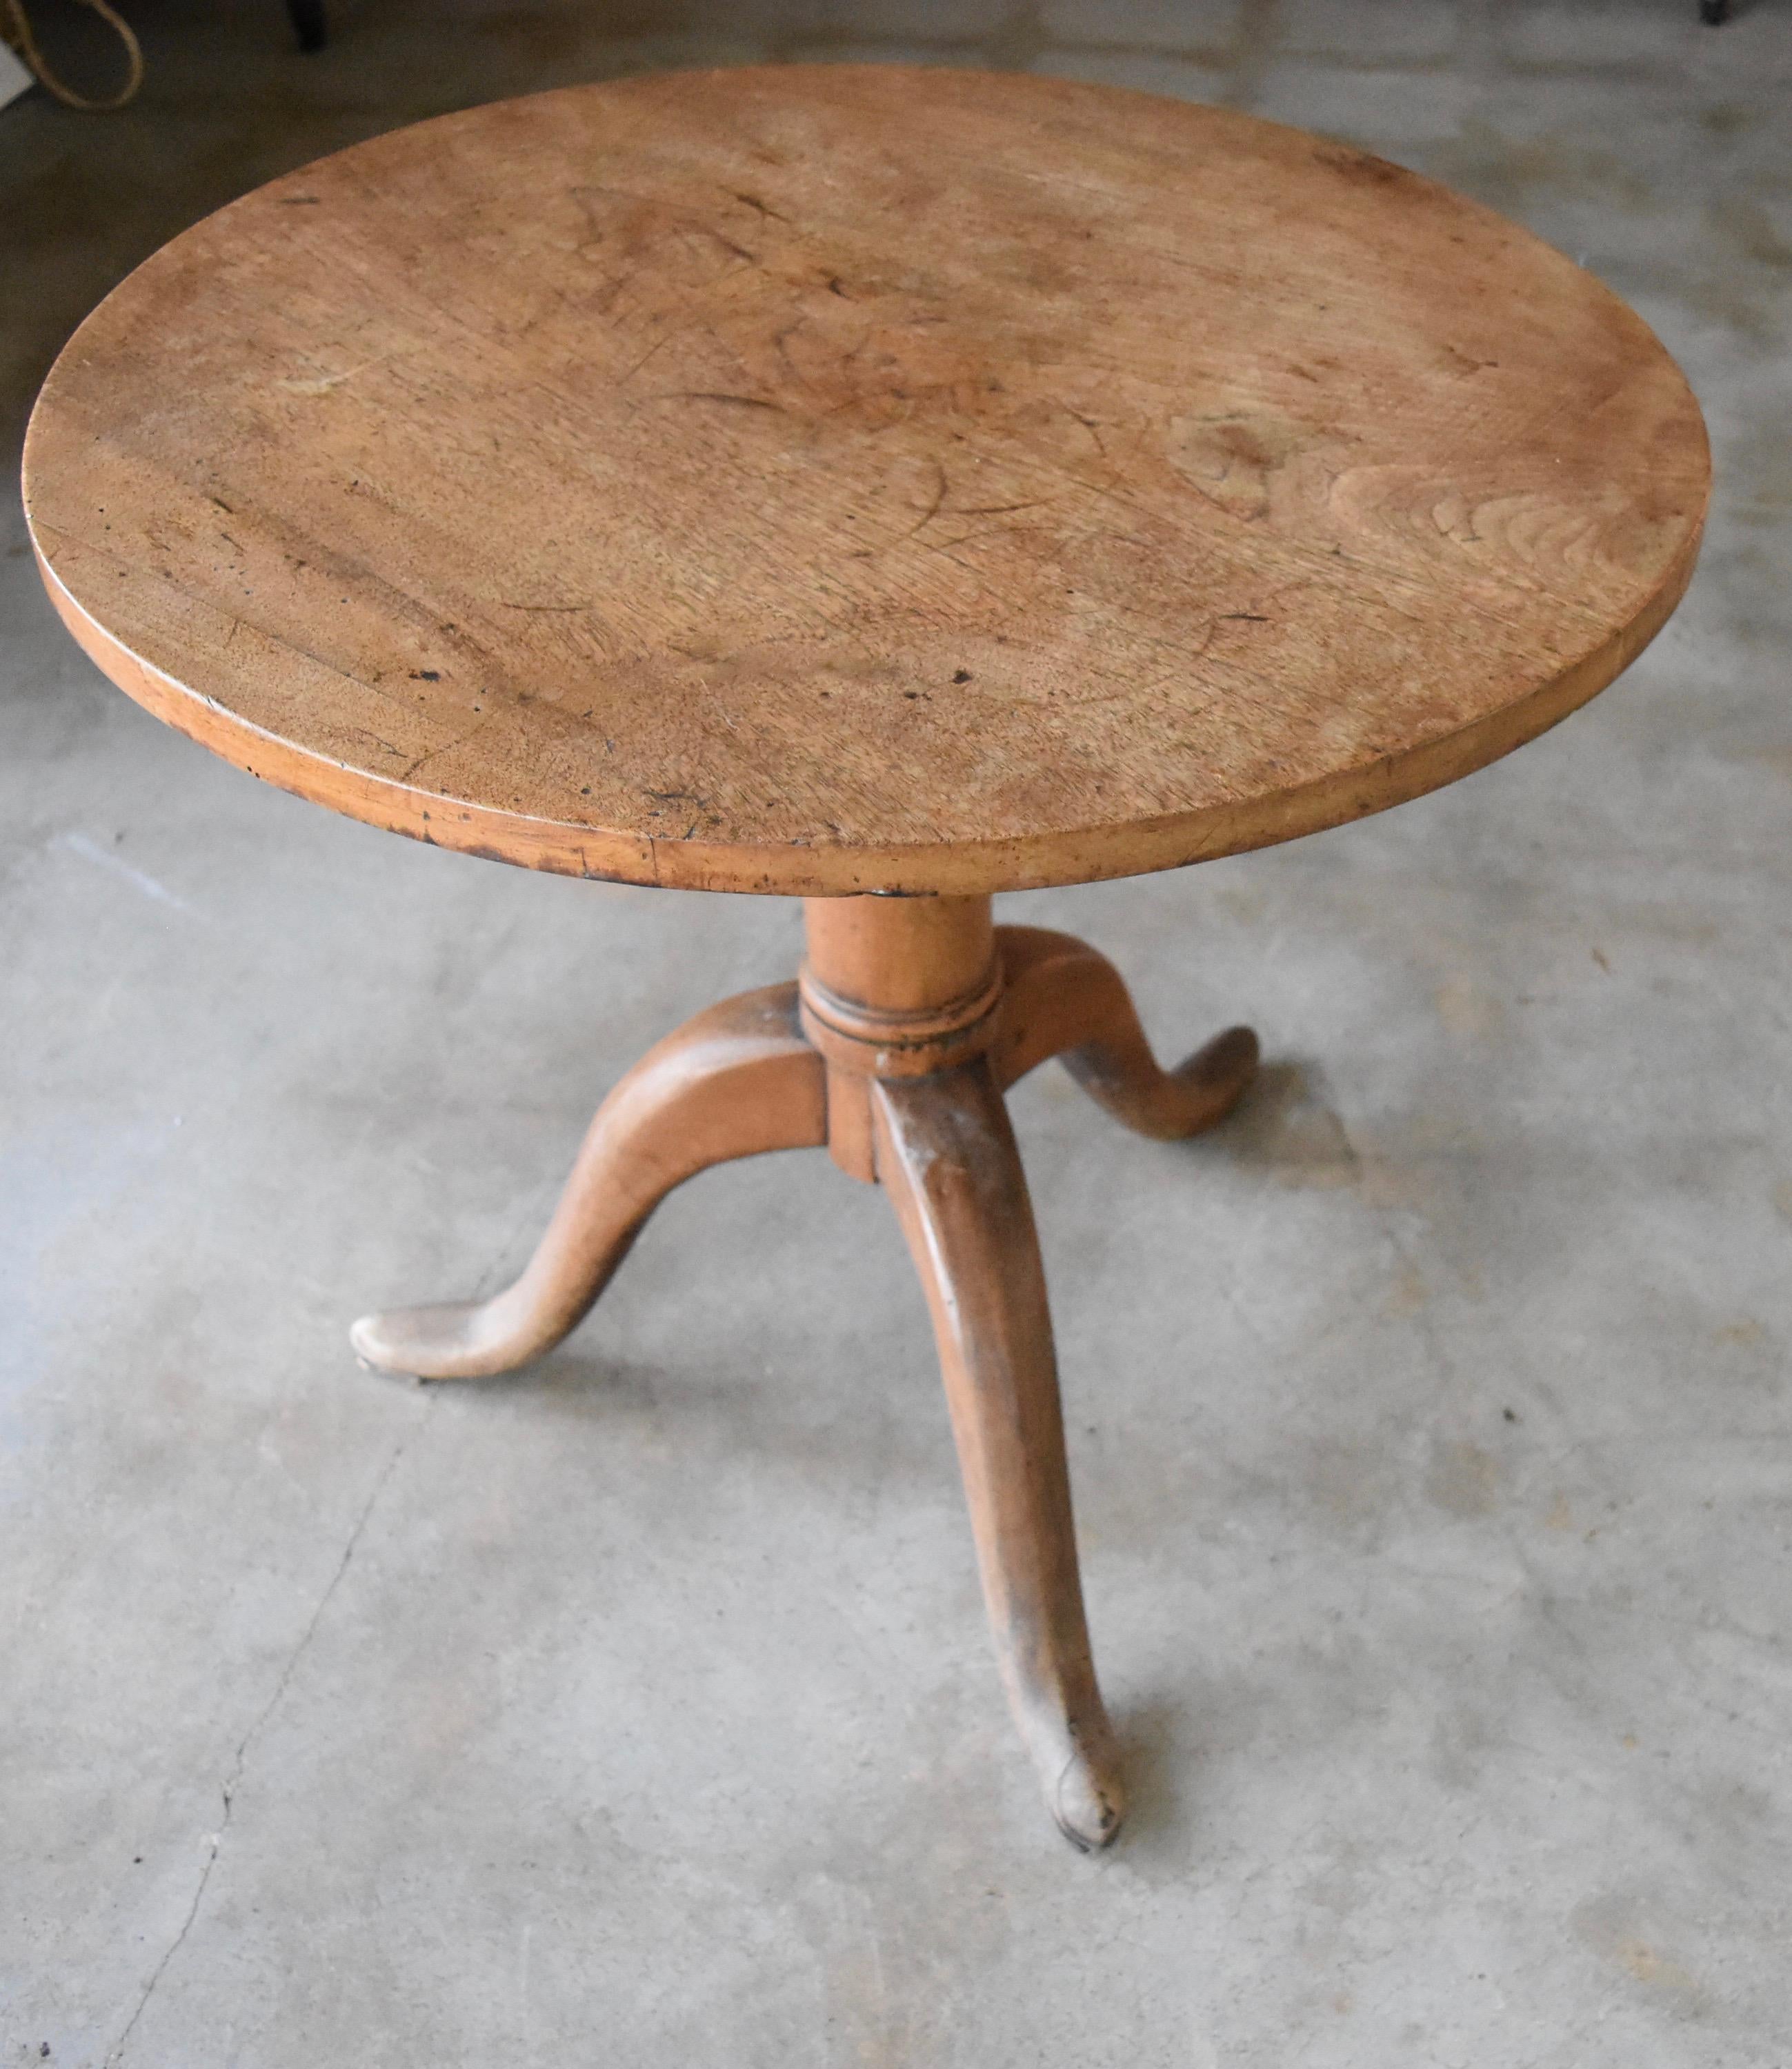 Little Italian pedestal table is perfect for a nook or next to a chair for a drink table. The walnut is very pretty and the patina is everything!